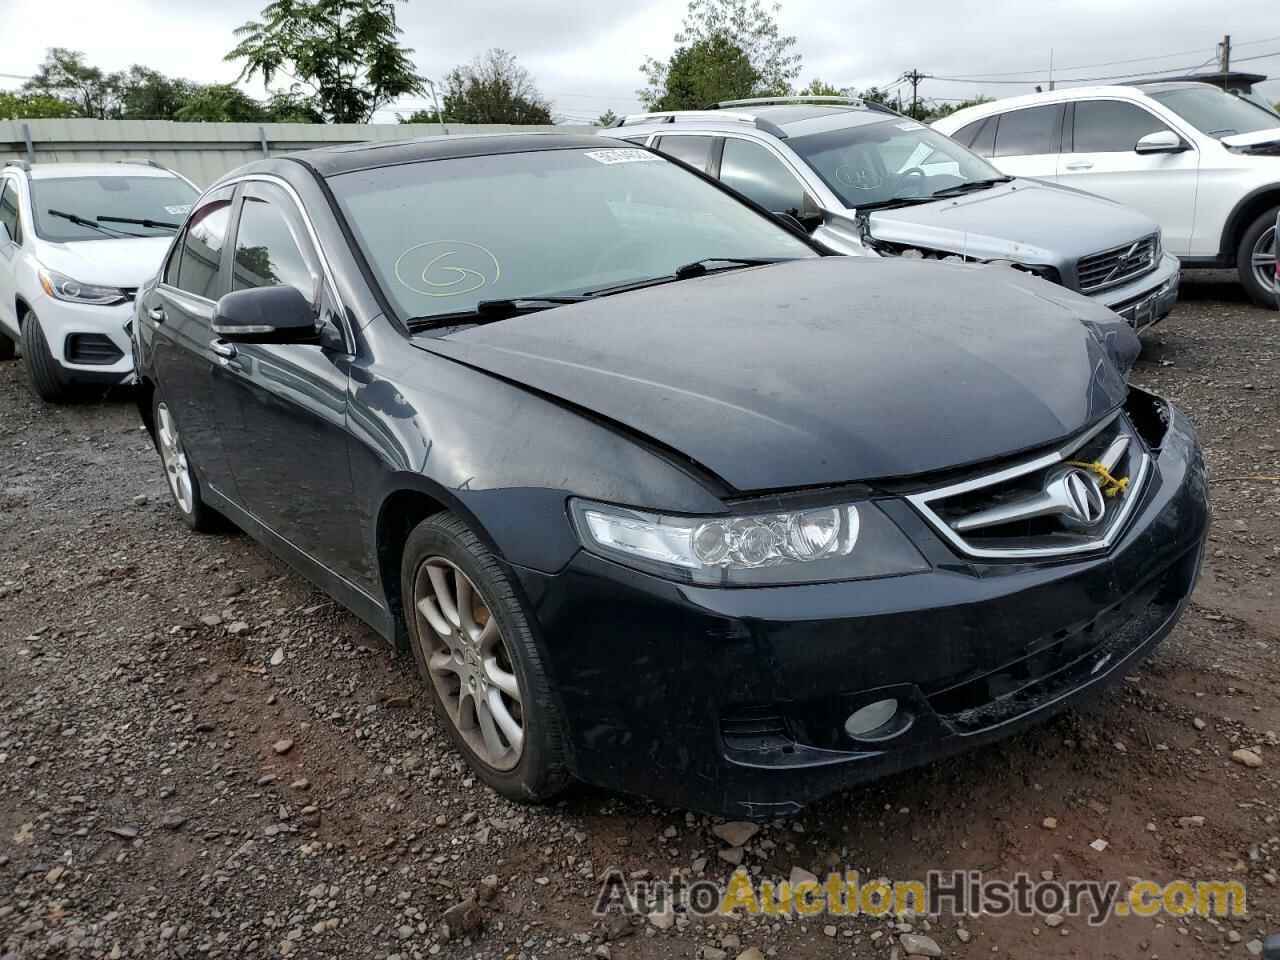 2007 ACURA TSX, JH4CL96917C010980